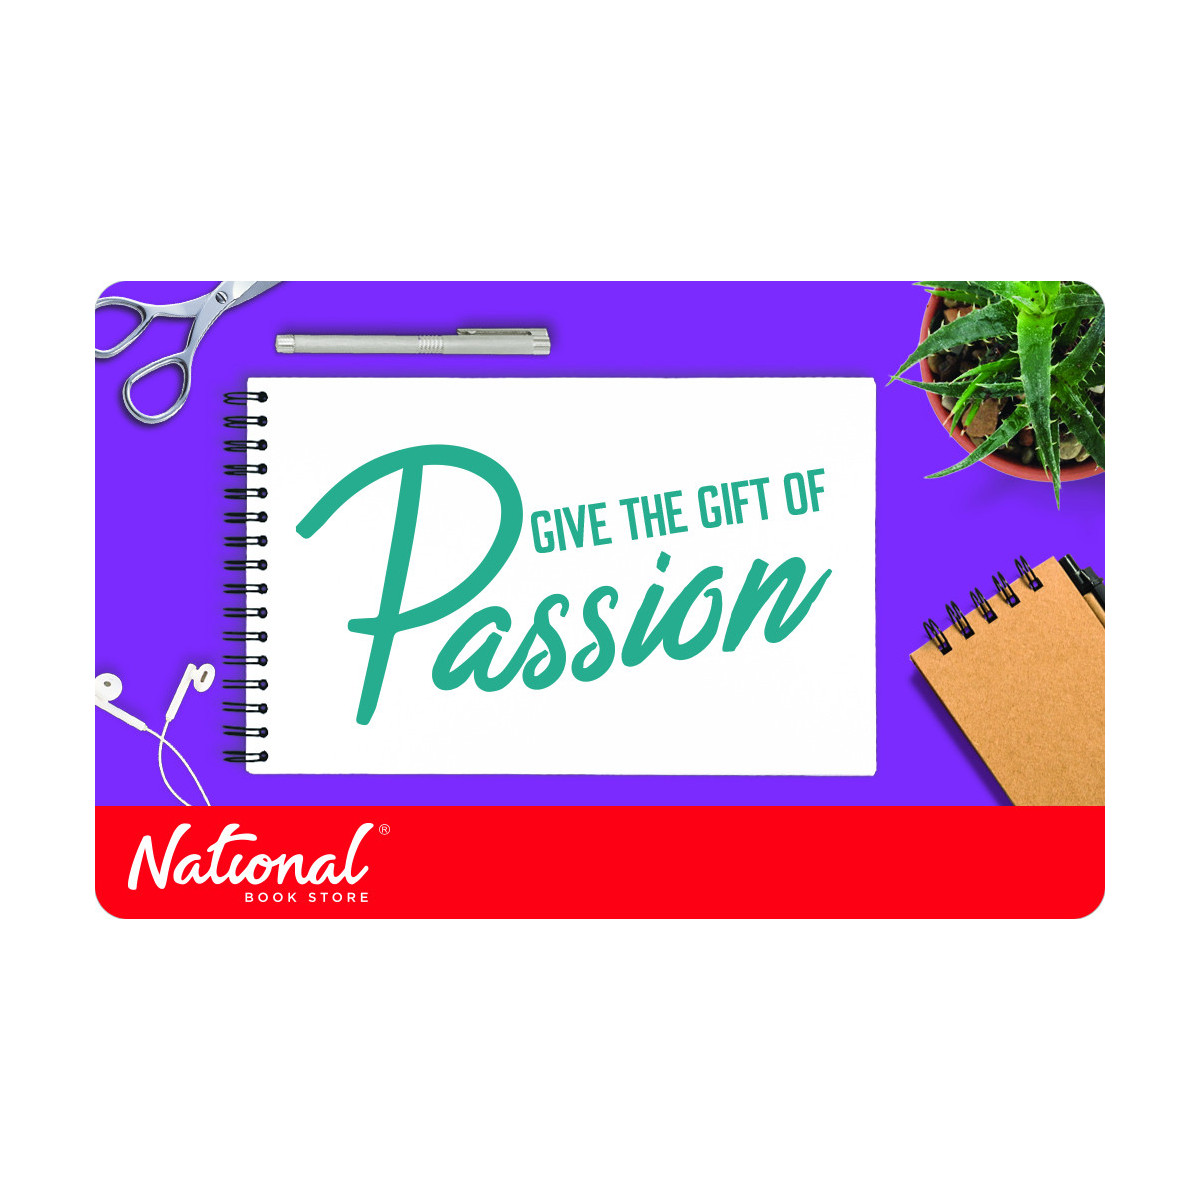 NBS GIFT CARD P300 (VALID FOR IN-STORE PURCHASE) - PURSUE YOUR PASSION DESIGN